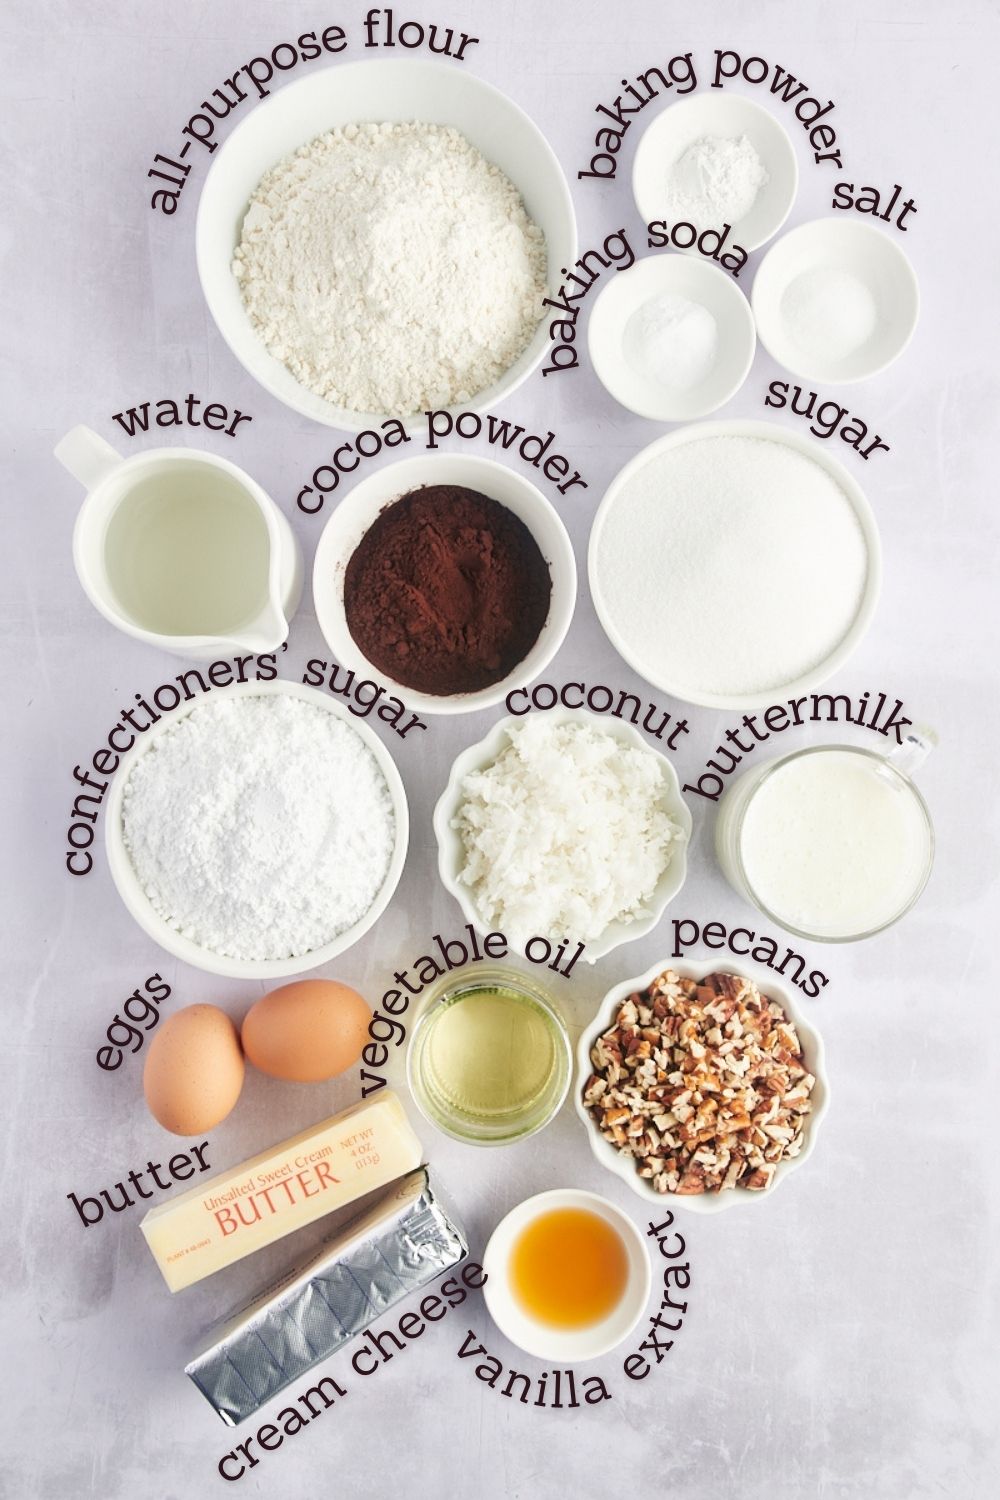 Overhead view of ingredients for earthquake cake with labels